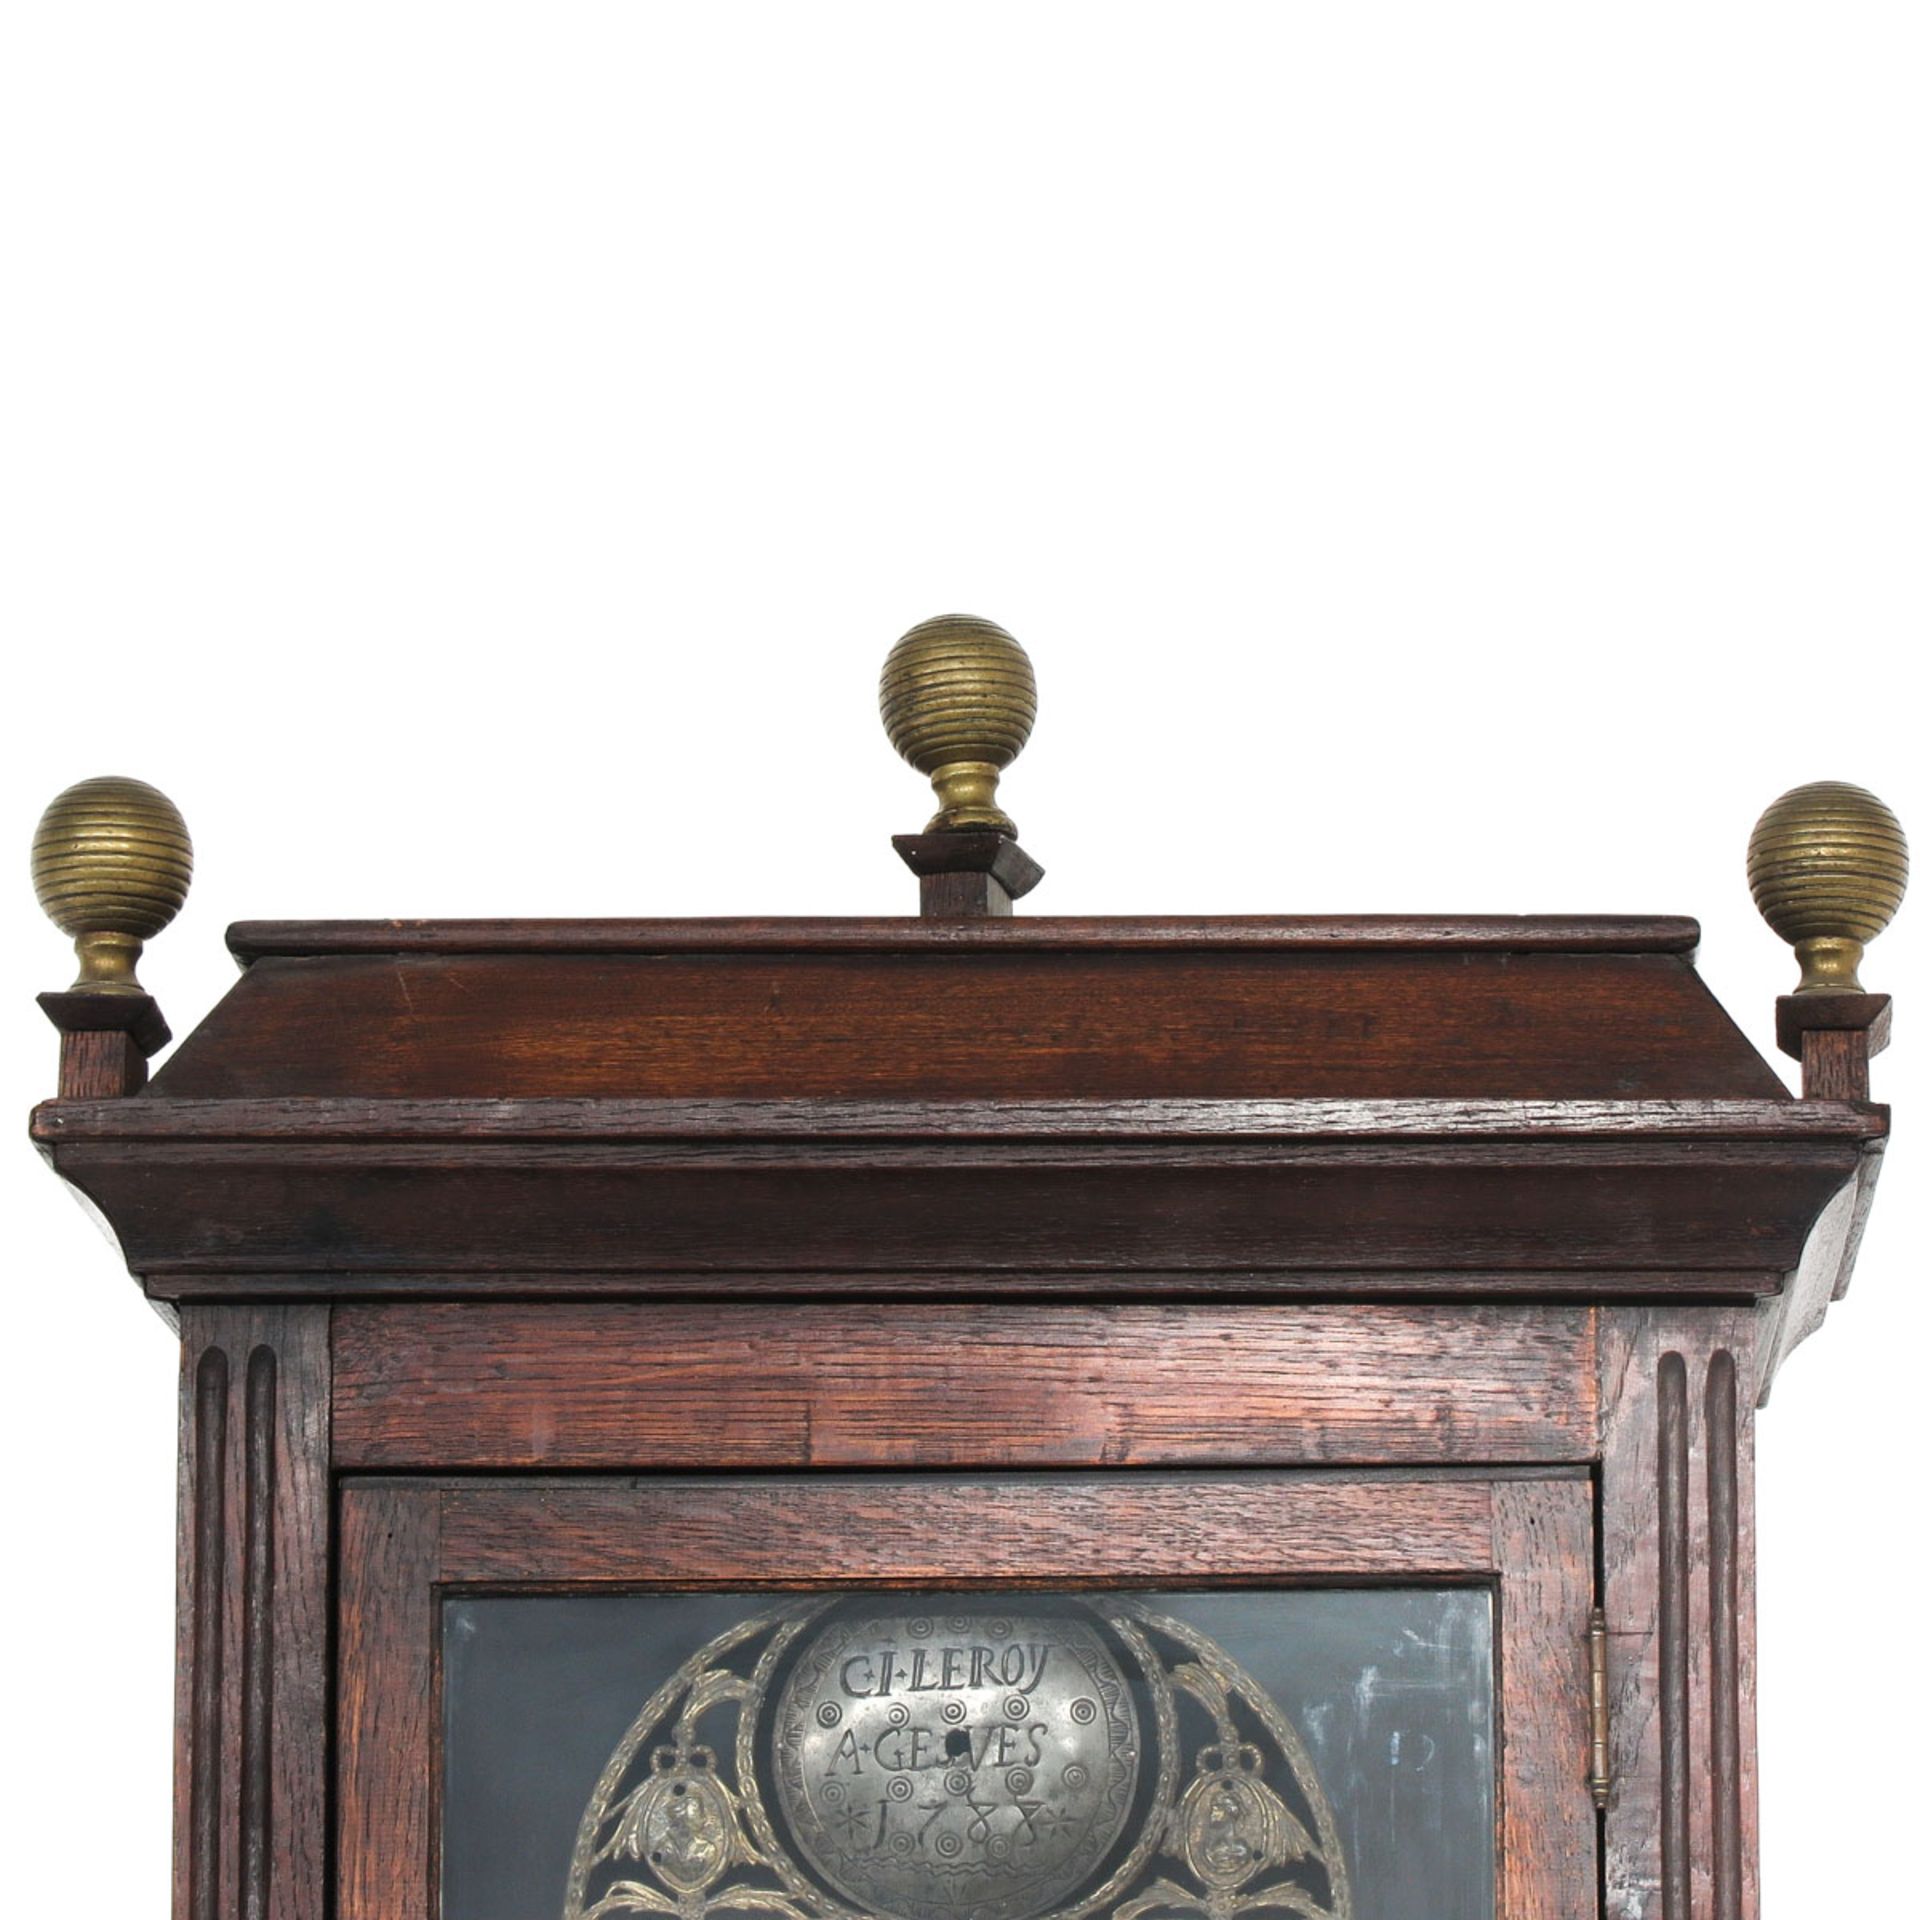 A Standing Clock Signed C.I. LeRoy a Gesves - Image 9 of 10